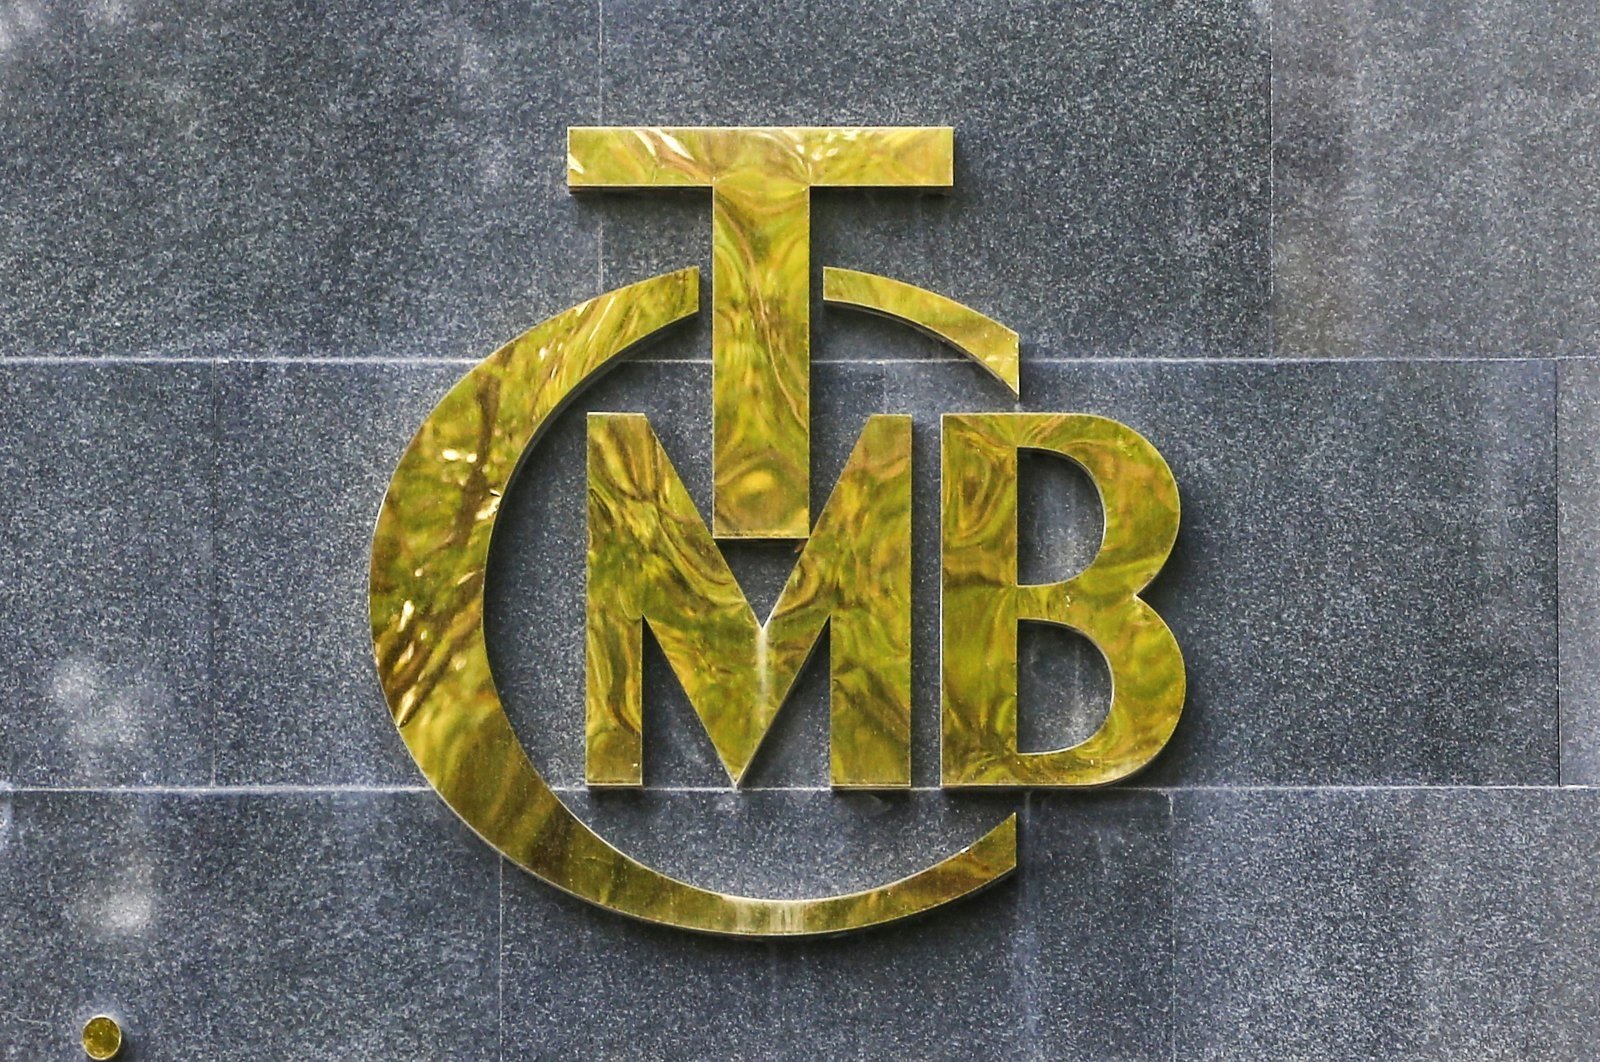 The logo of the Central Bank of the Republic of Türkiye (CBRT) is pictured at the entrance of its headquarters in Ankara, Türkiye, Oct. 15, 2021. (Reuters Photo)